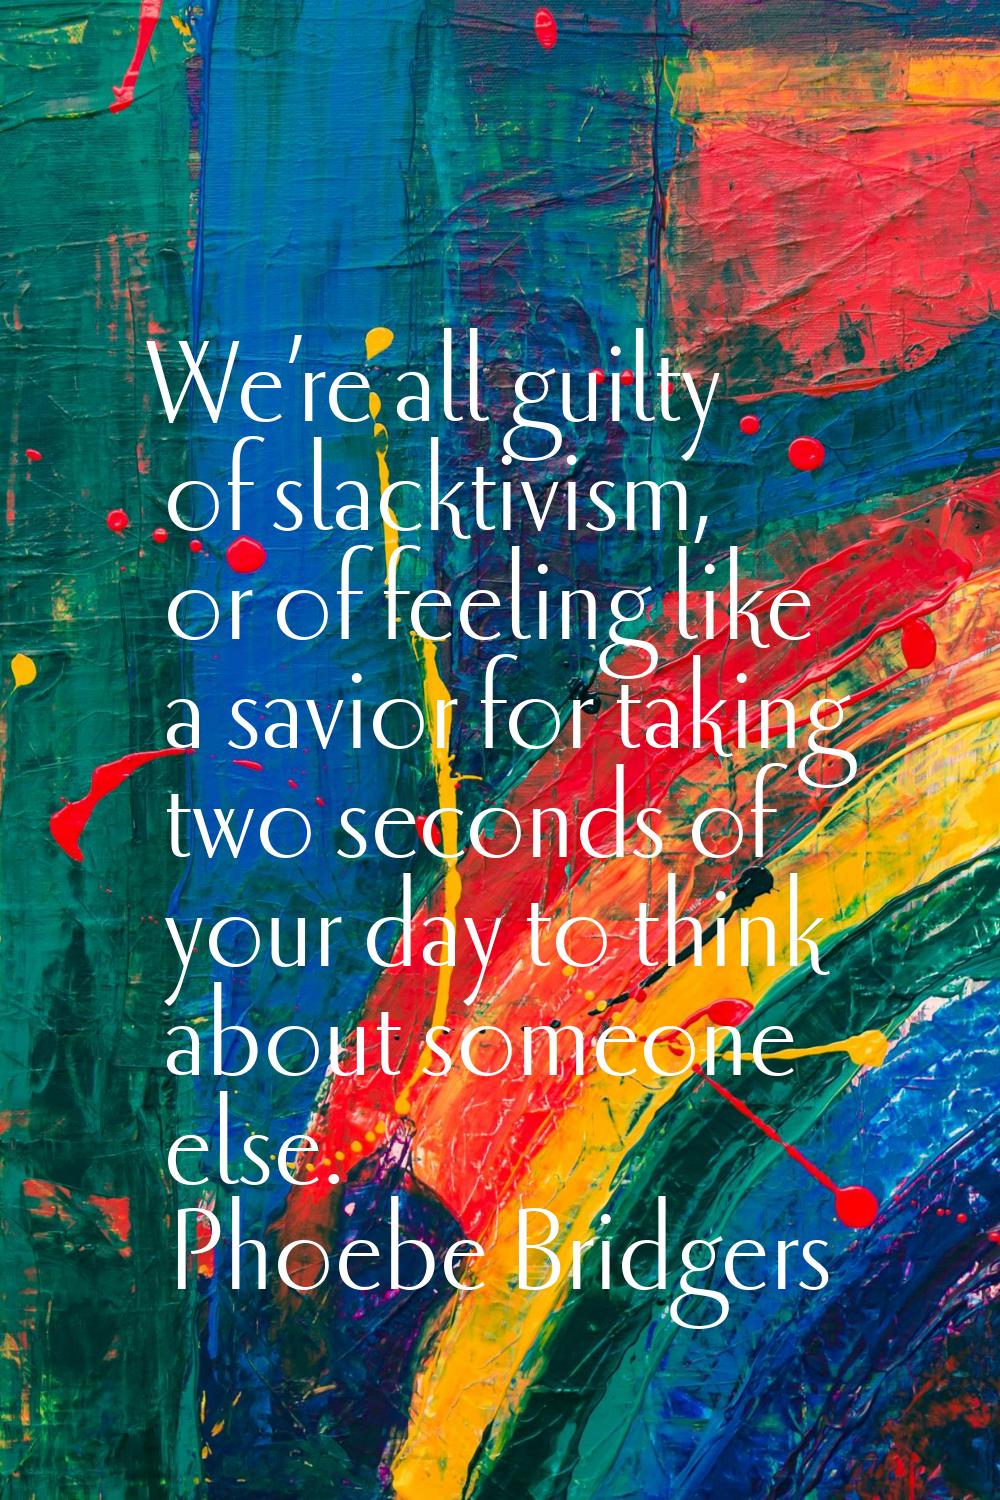 We’re all guilty of slacktivism, or of feeling like a savior for taking two seconds of your day to 